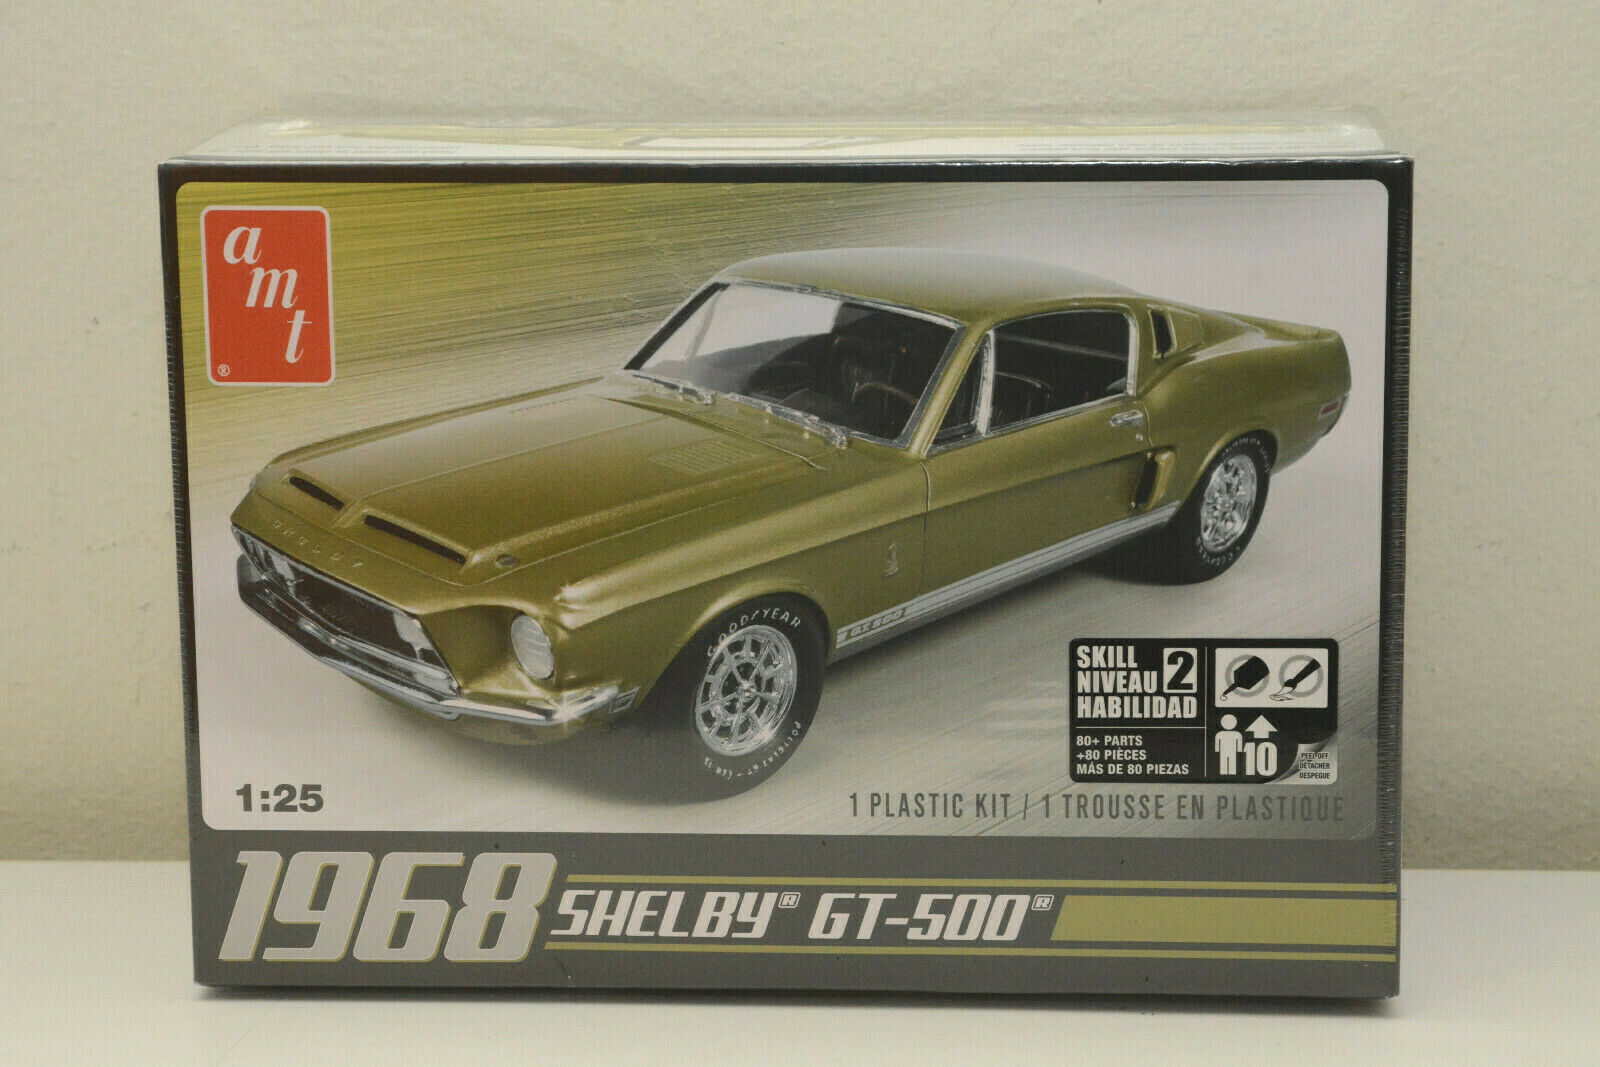 AMT AMT634M12 1968 Shelby GT-500 Plastic Model Kit by AMT.